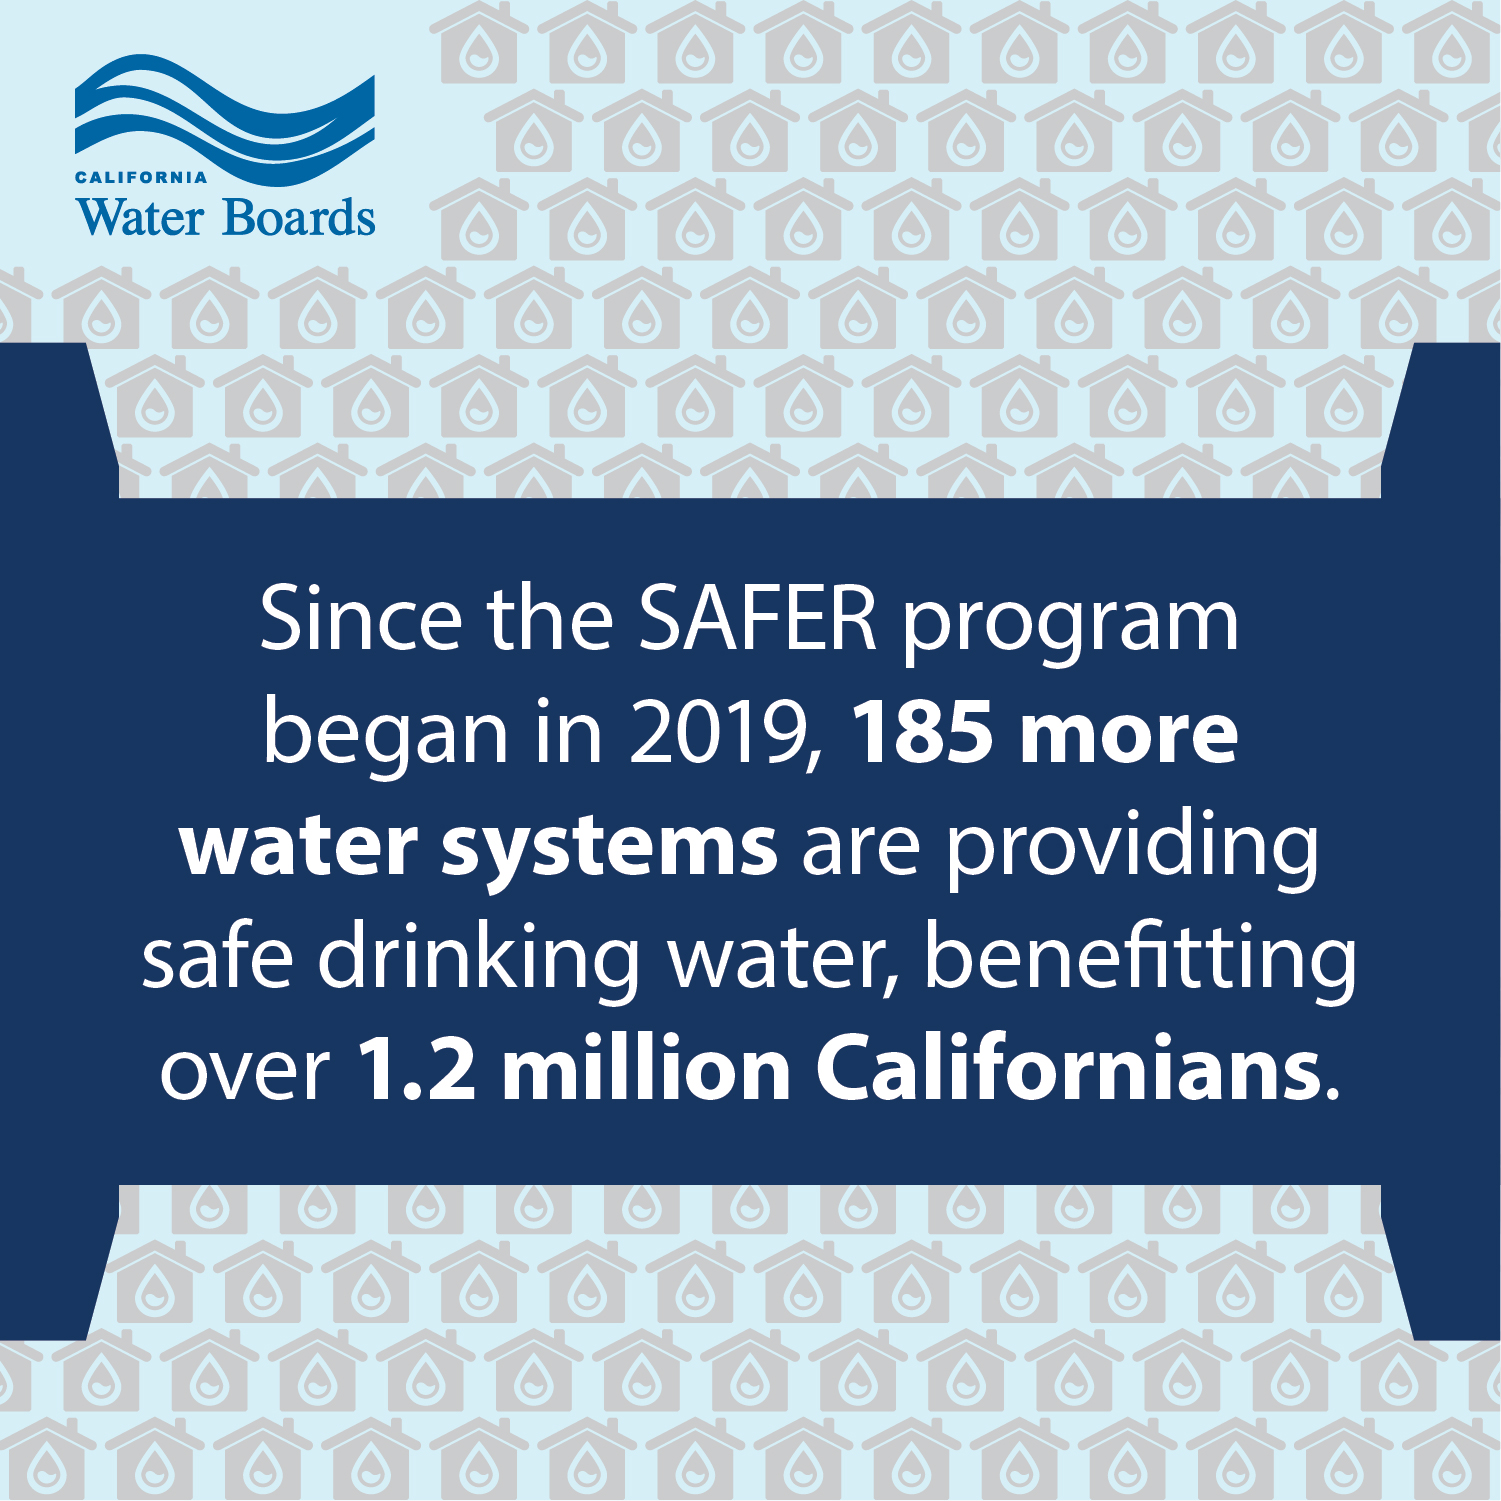 185 water systems created under SAFER